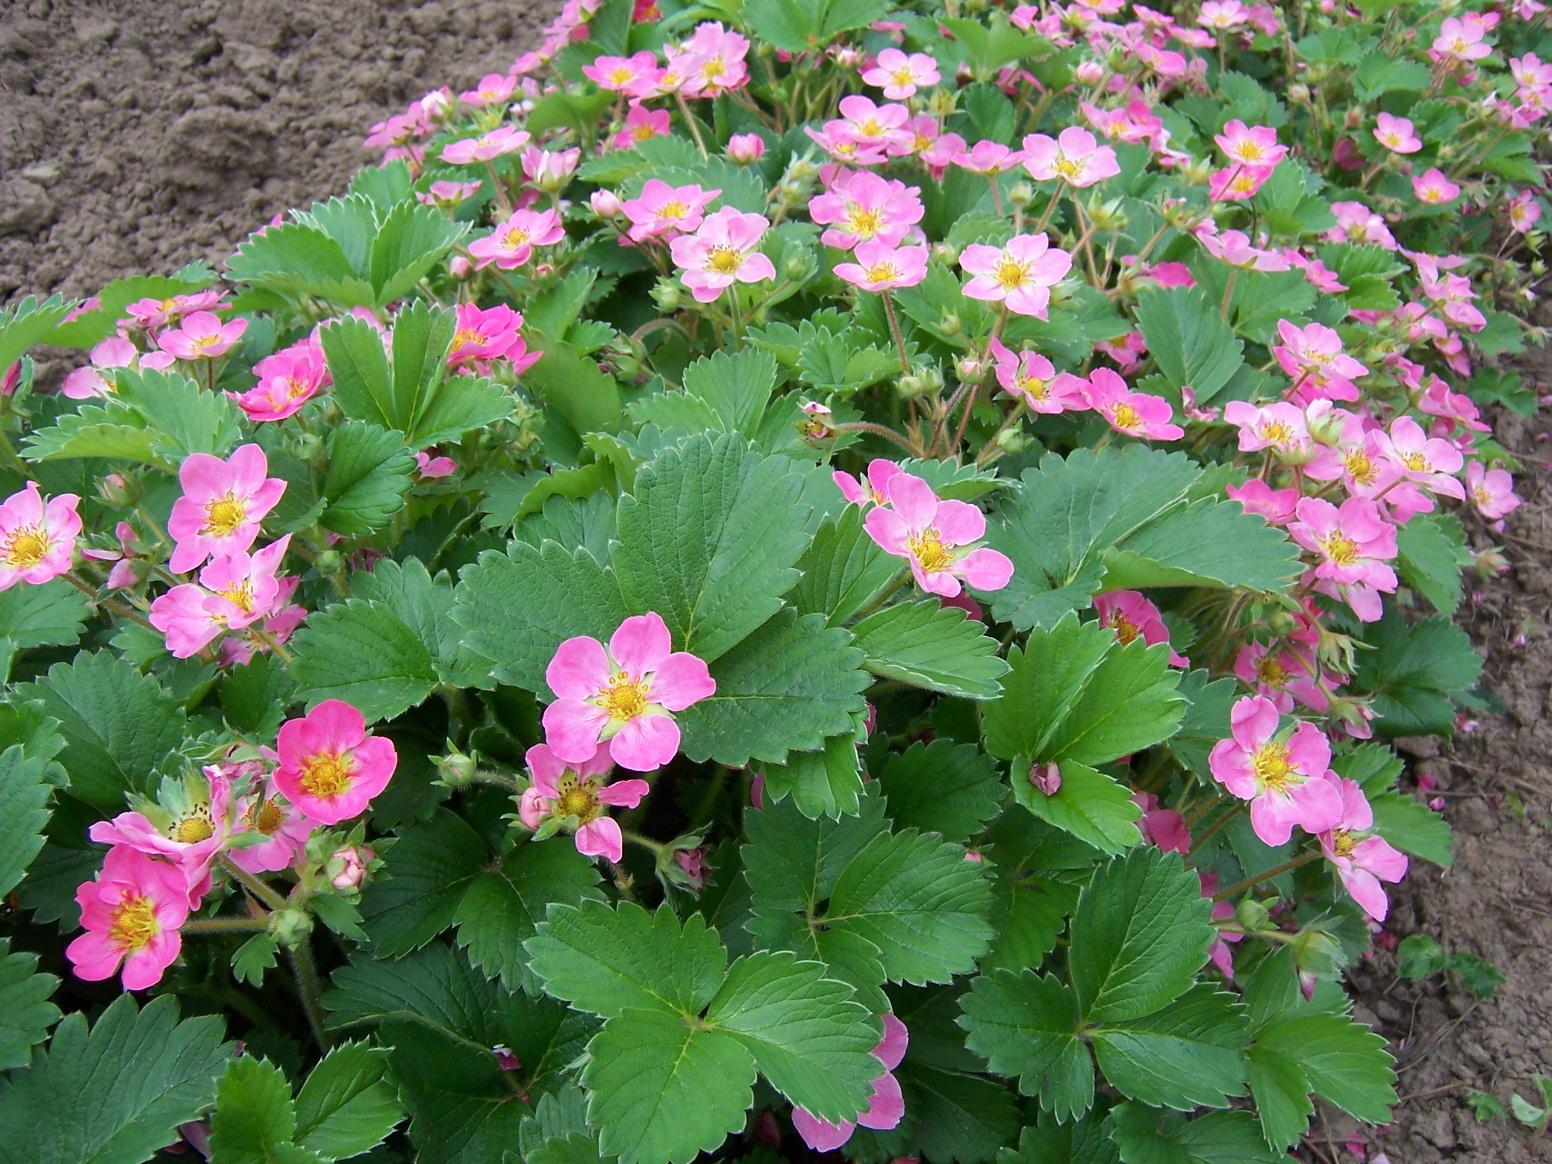 Foliage and pink blooms of wild strawberry.